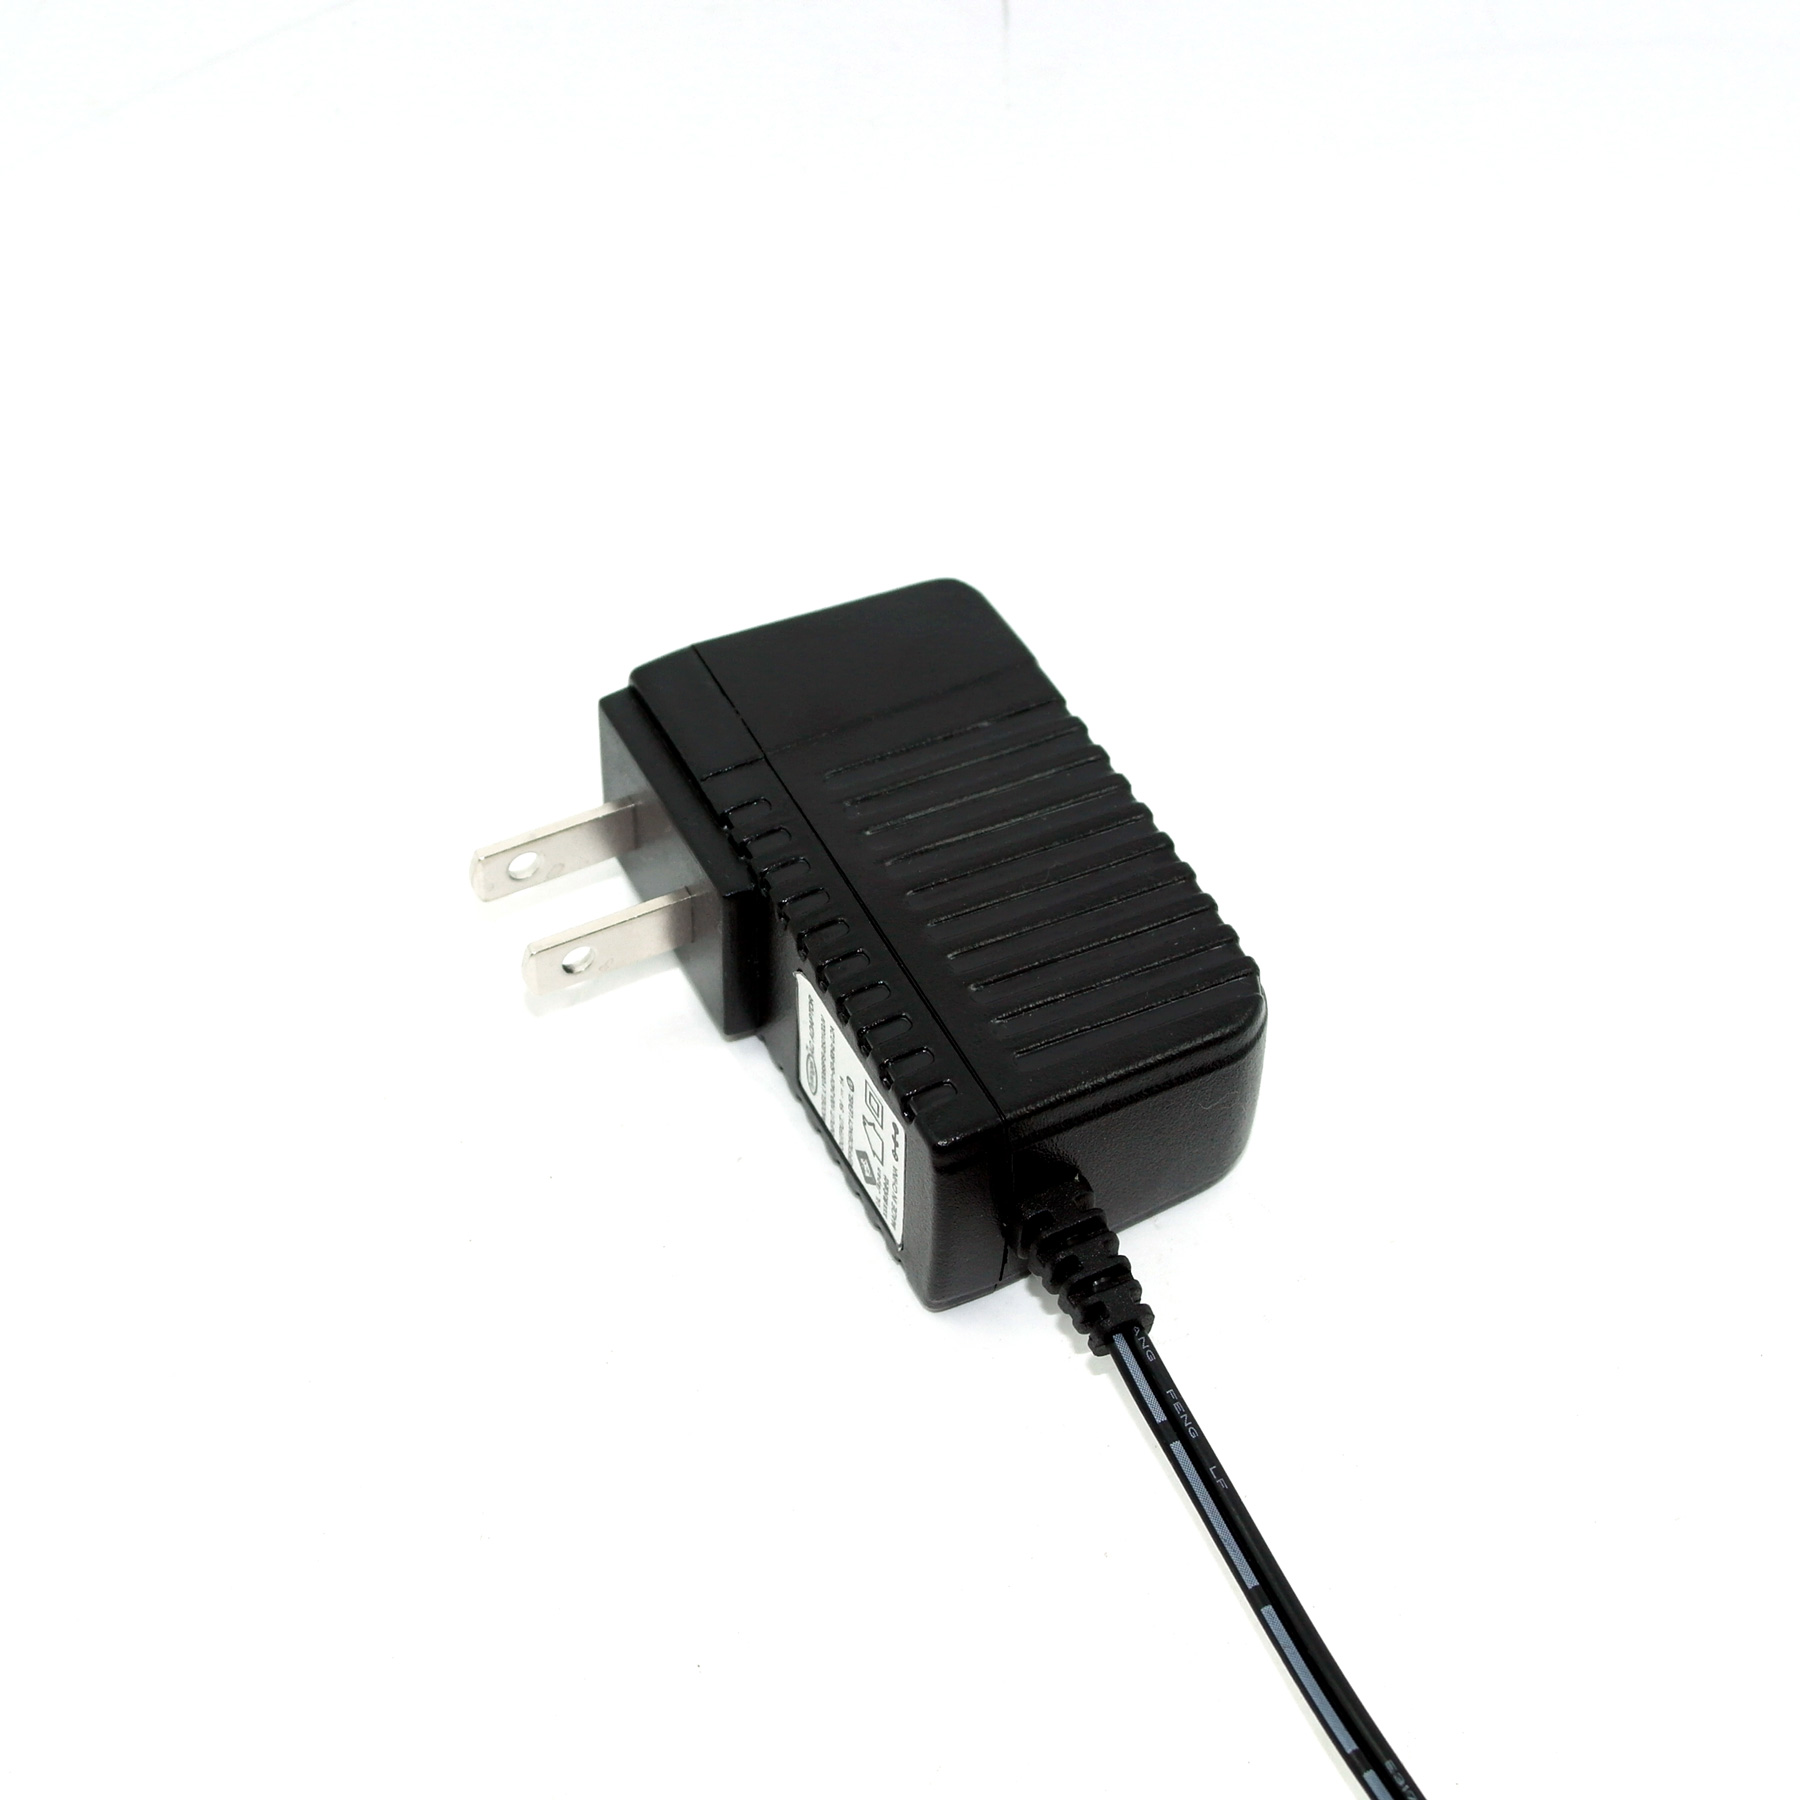 5.9V 0.4A AC/DC adapter, switching power supply